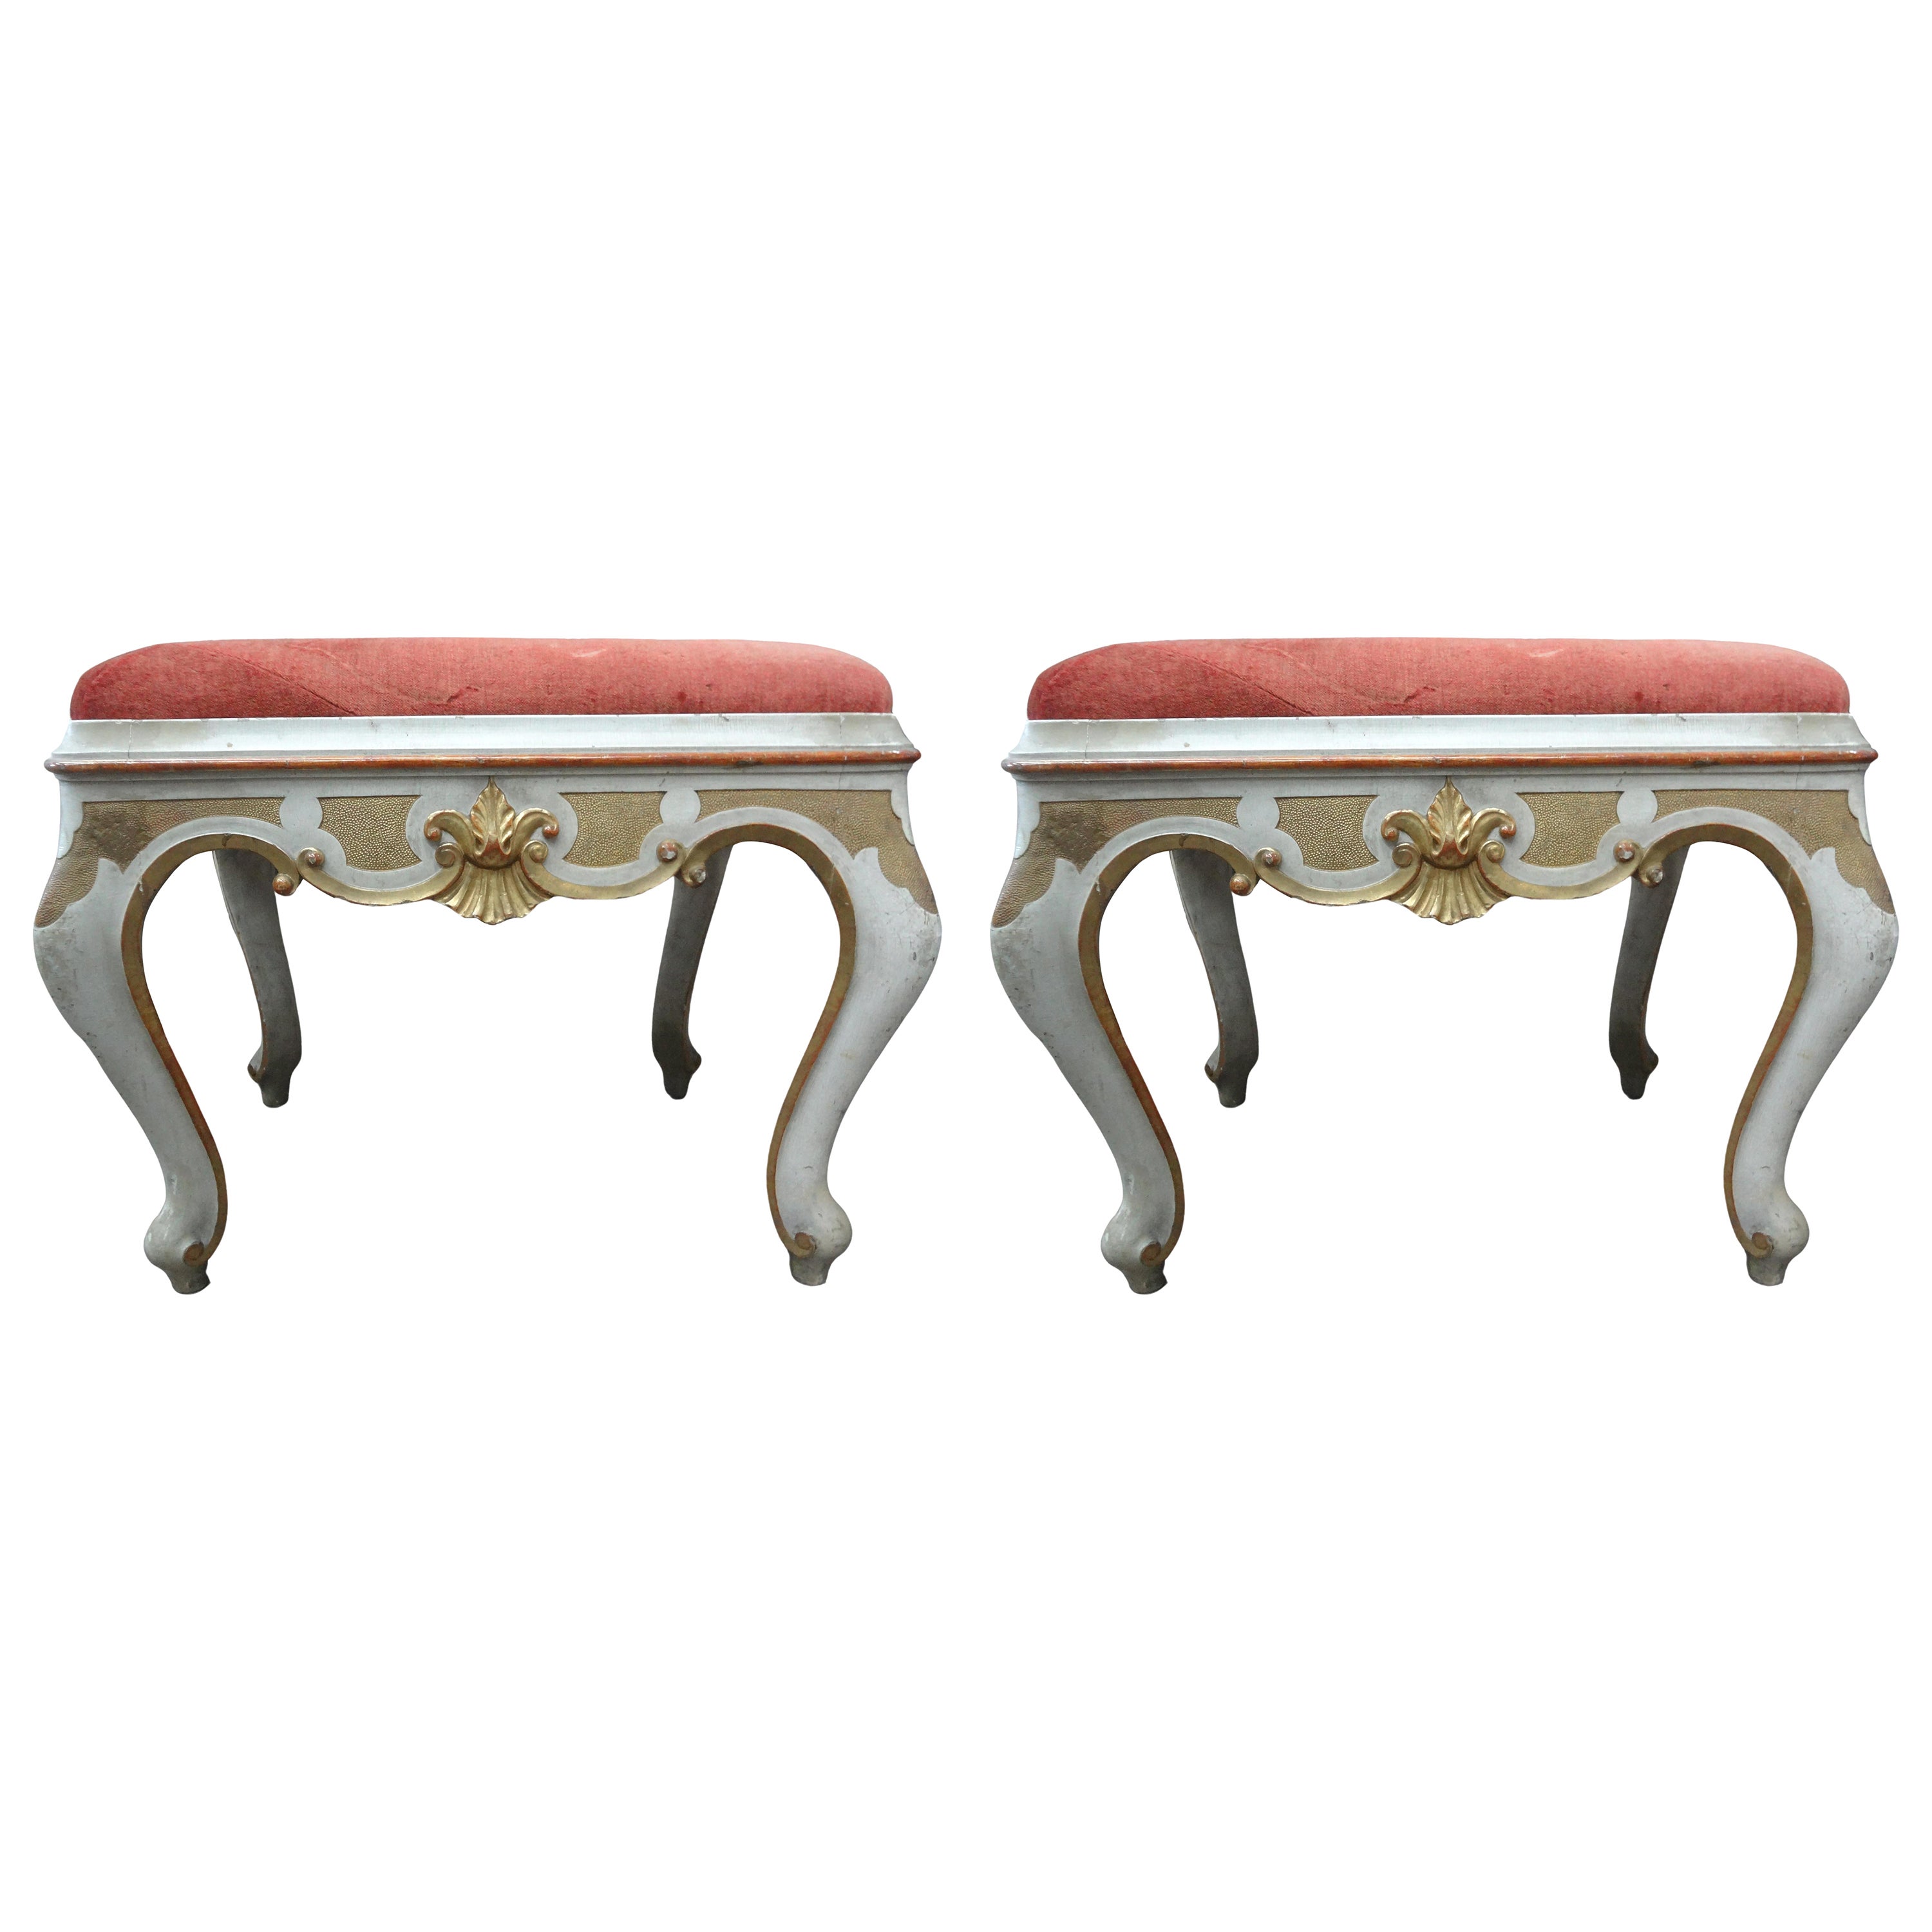 Pair of 19th Century Italian Painted and Gilt Ottomans For Sale